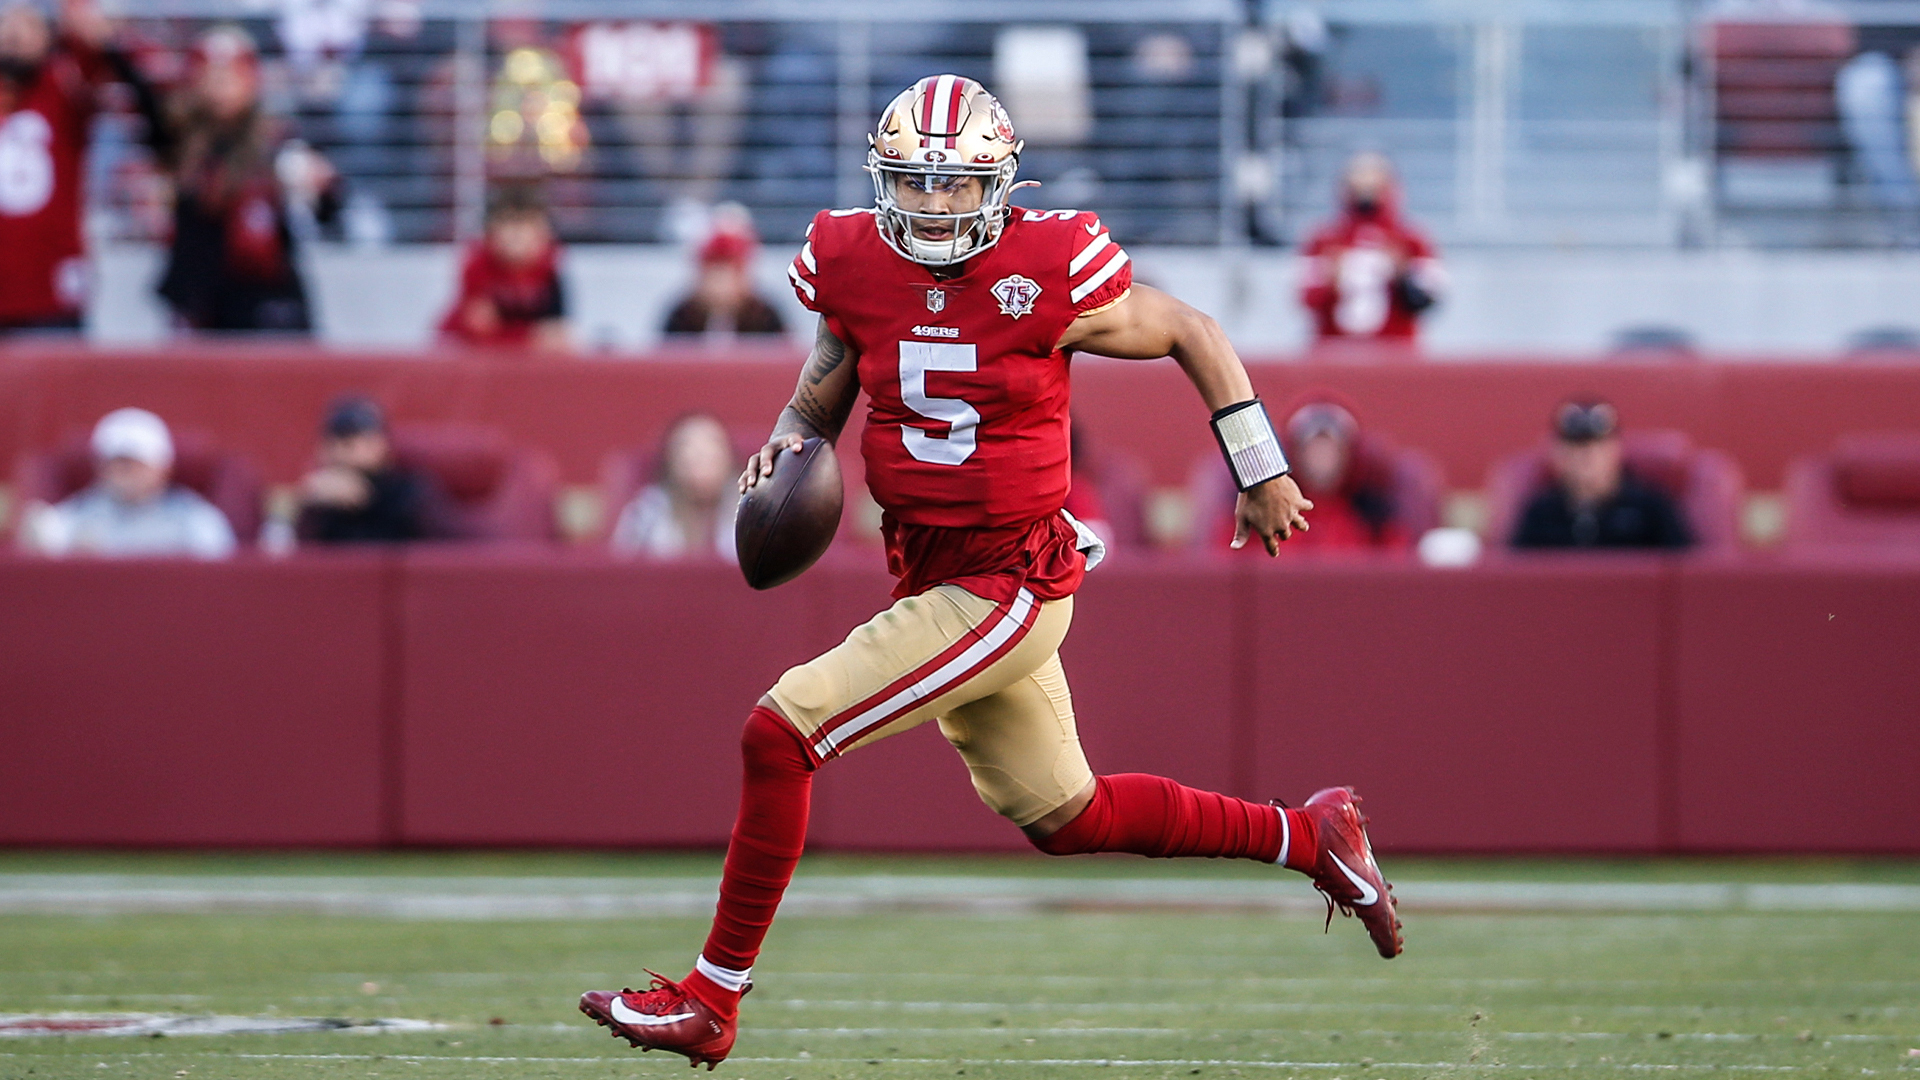 2023 NFL odds: Will Trey Lance play again for the 49ers?